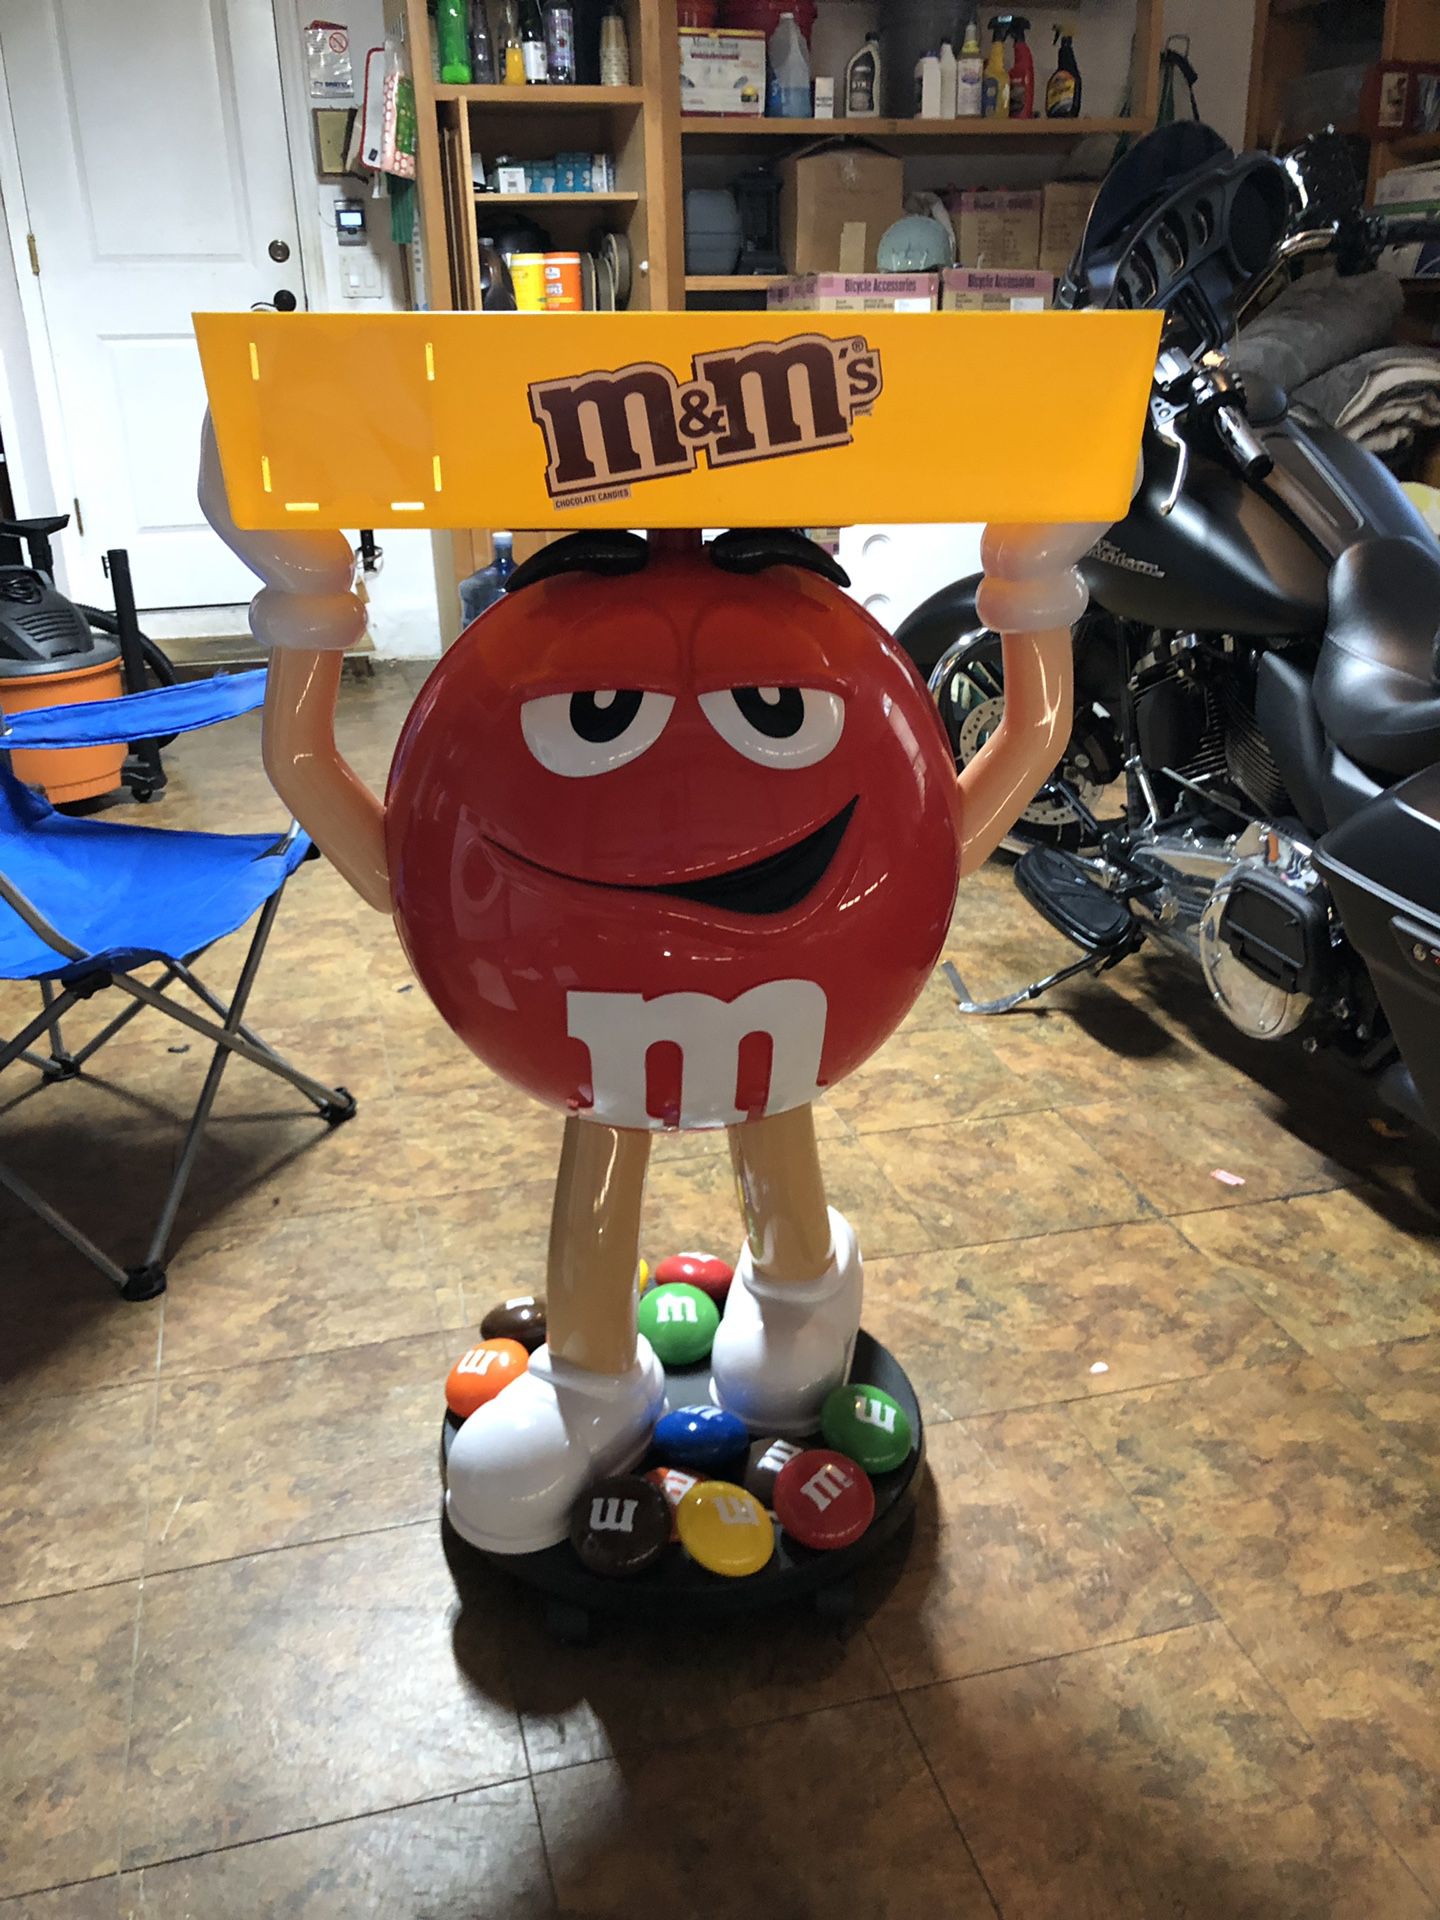 NEW Handmade Giant Red M&M Sweet Candy Prop 